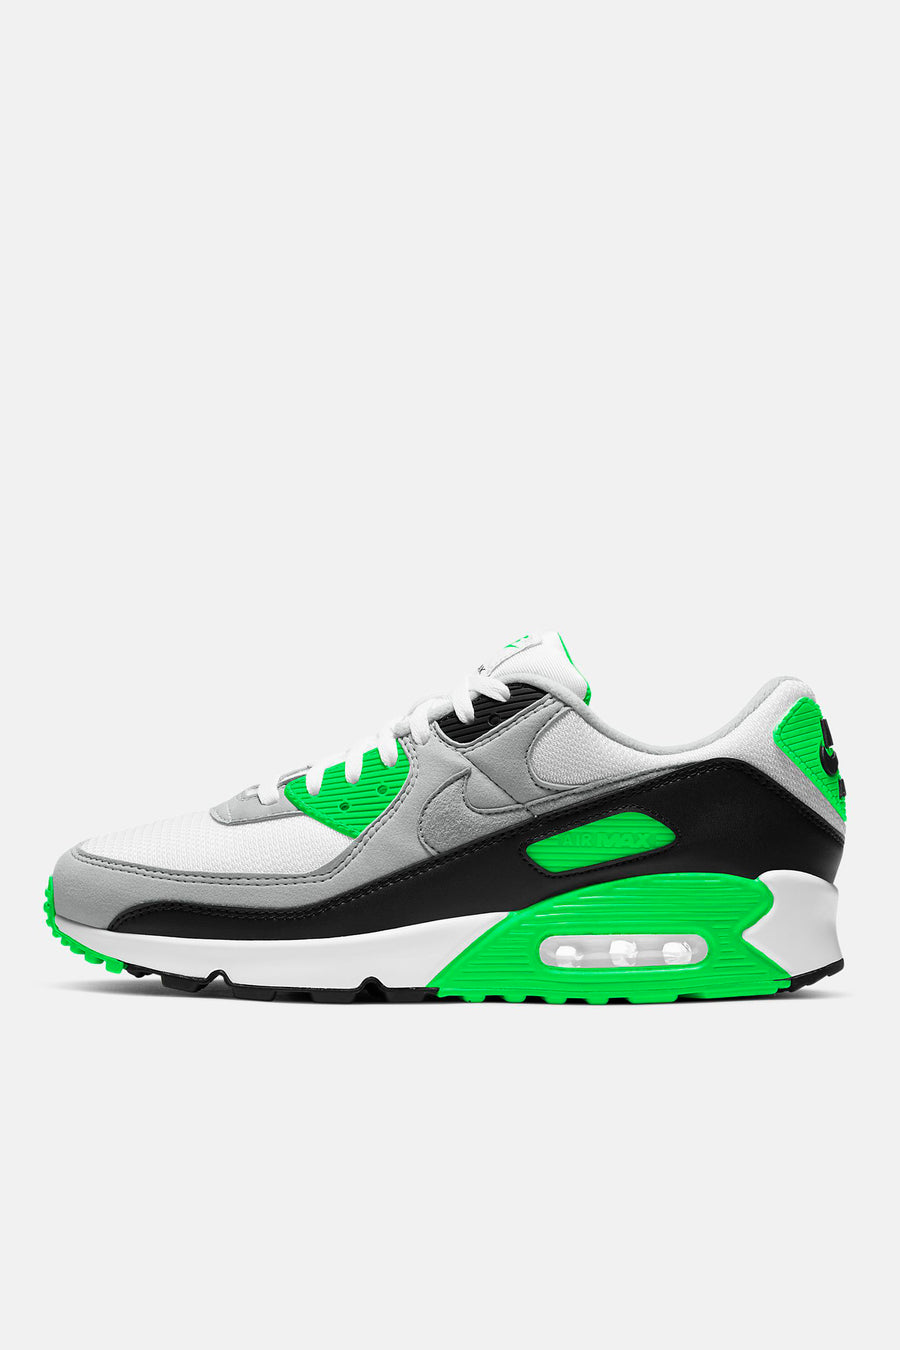 white and green air max 90